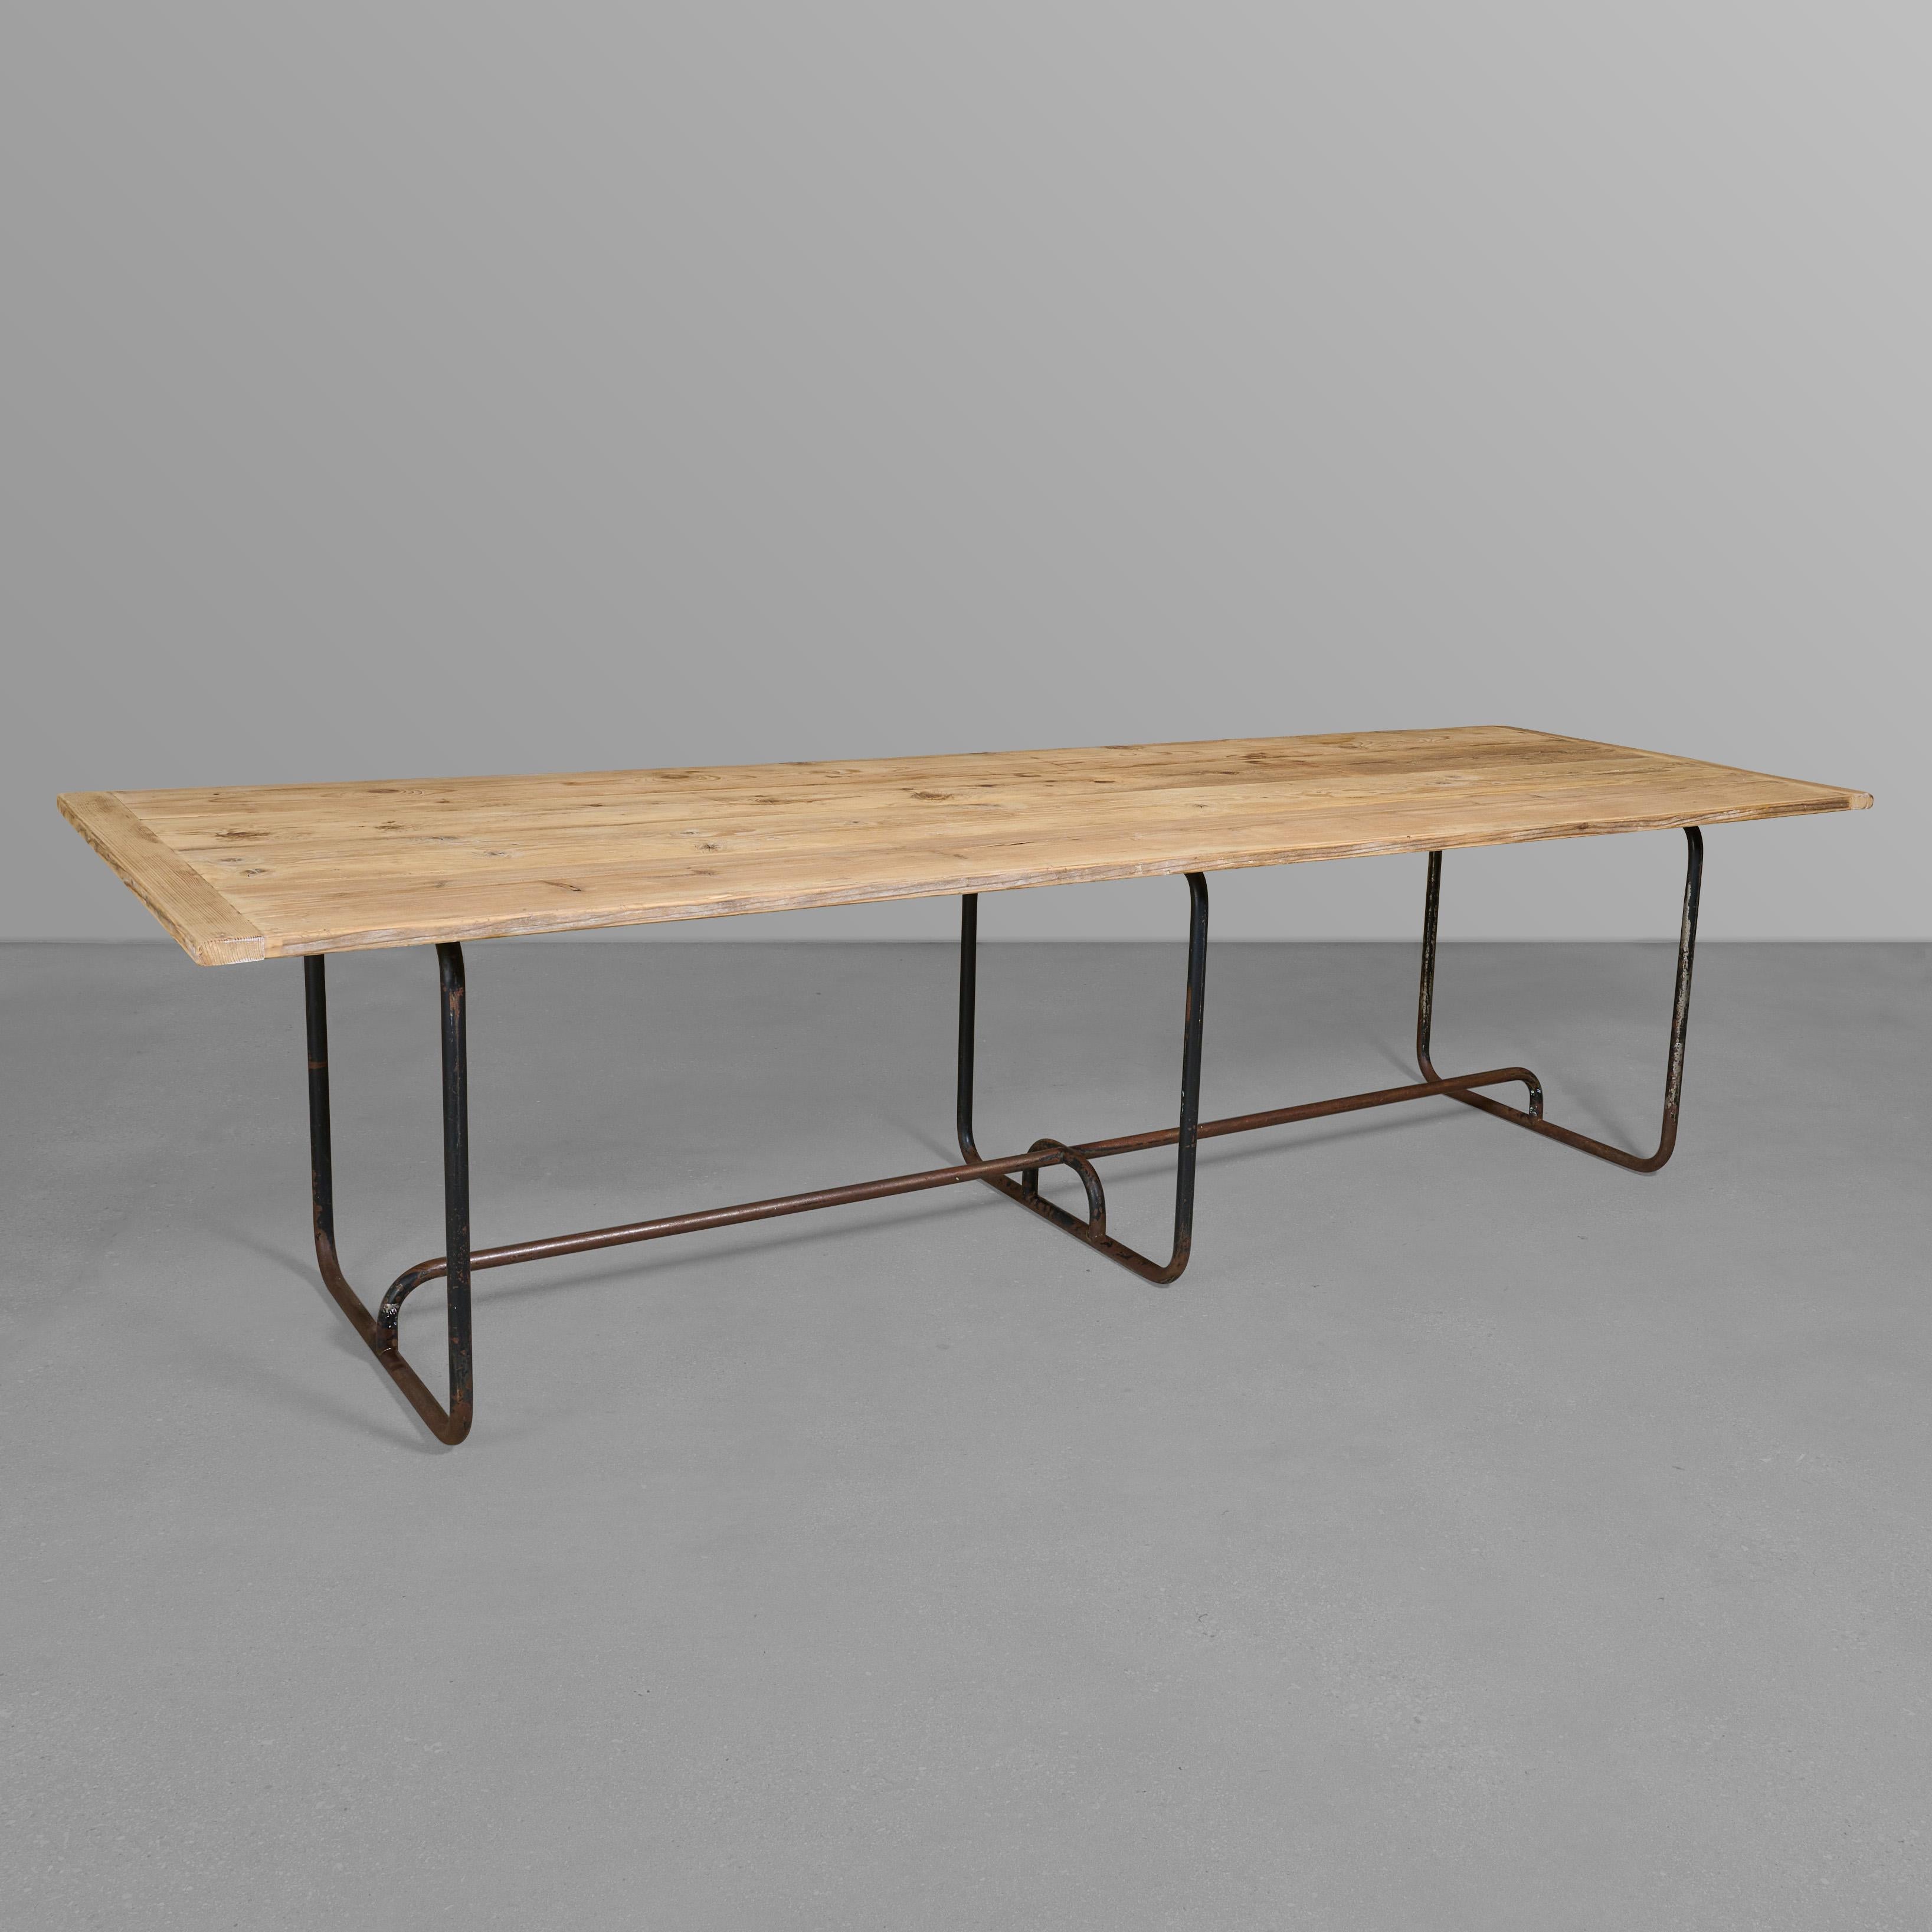 Fantastic six leg iron base table with wonderful pine top. Very cool, great design.

